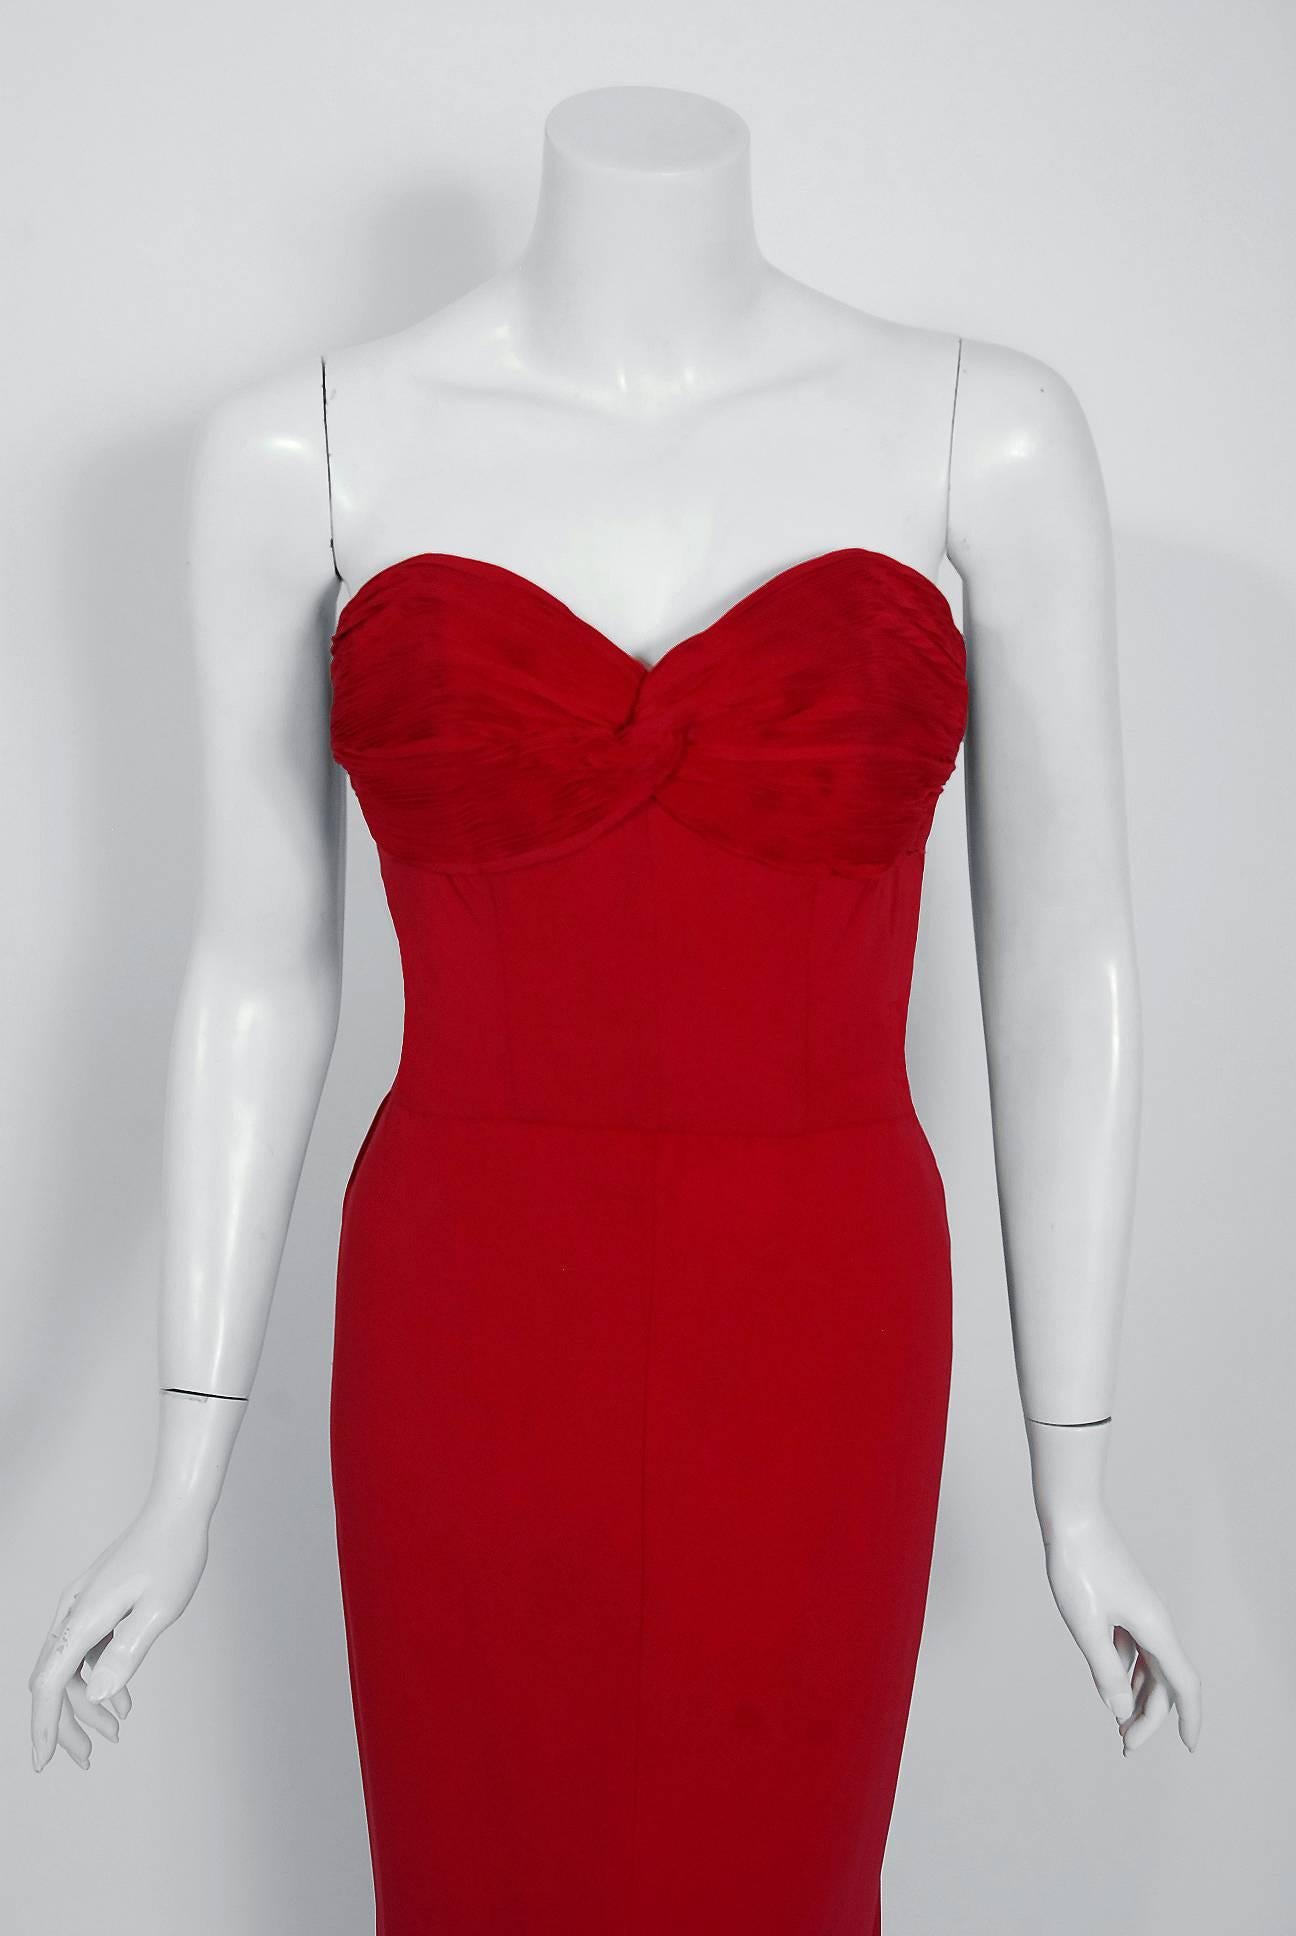 A seductive raspberry-red couture hourglass evening gown from the 1940's era of glamour. This stunning silk-rayon dress has so much detail, you can tell it was made with loving devotion. The bodice is hand-pleated and hand-stitched into place with a